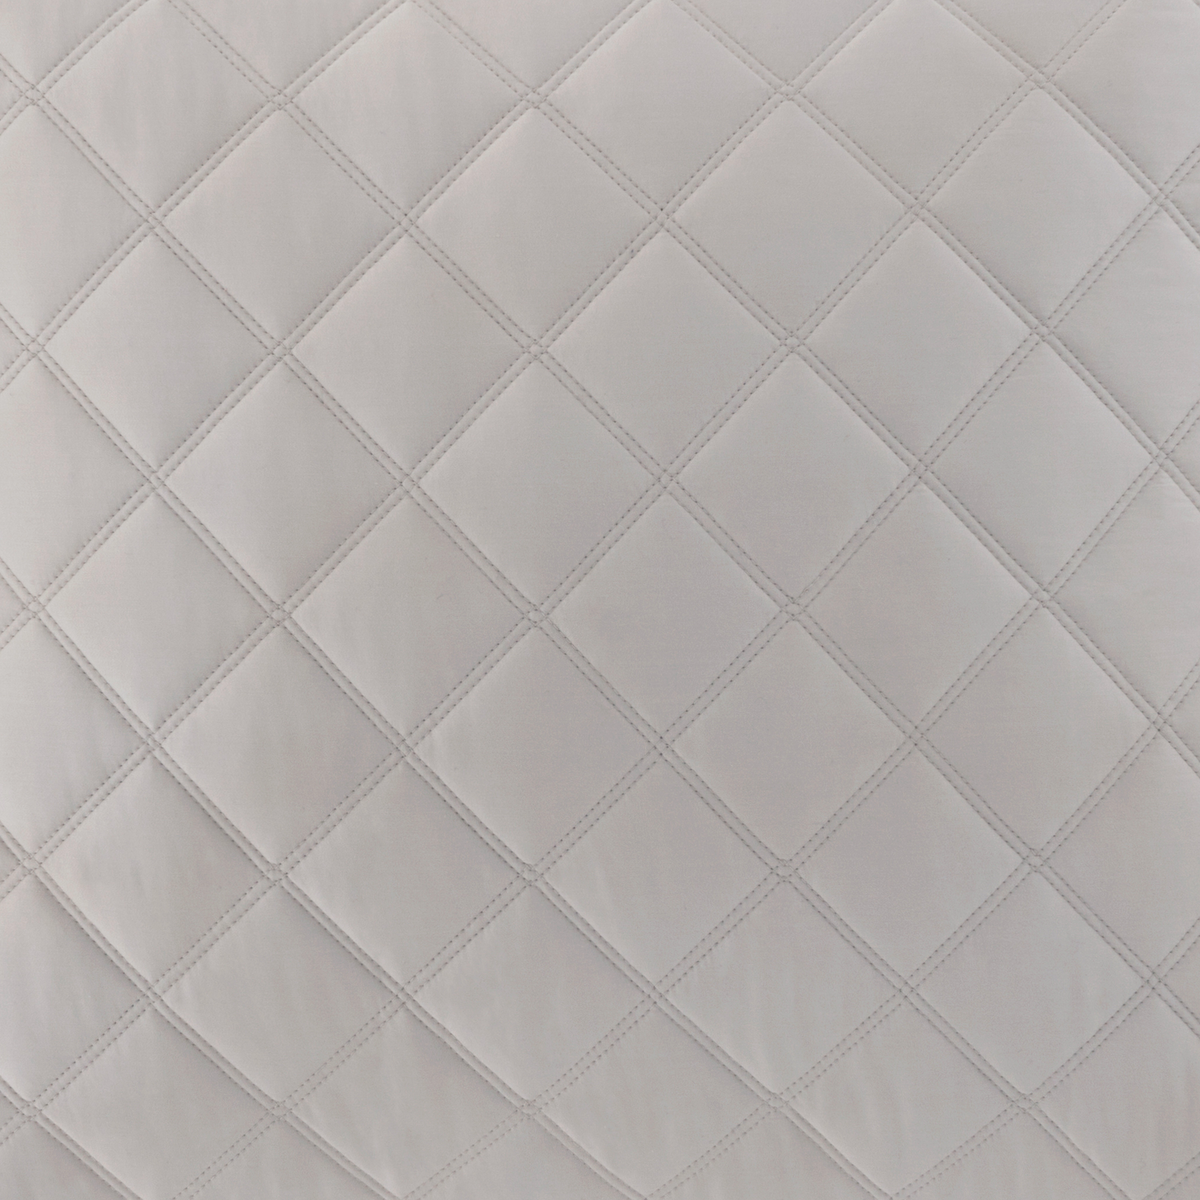 Swatch Sample of Grey Pine Cone Hill Quilted Silken Solid Coverlet and Shams